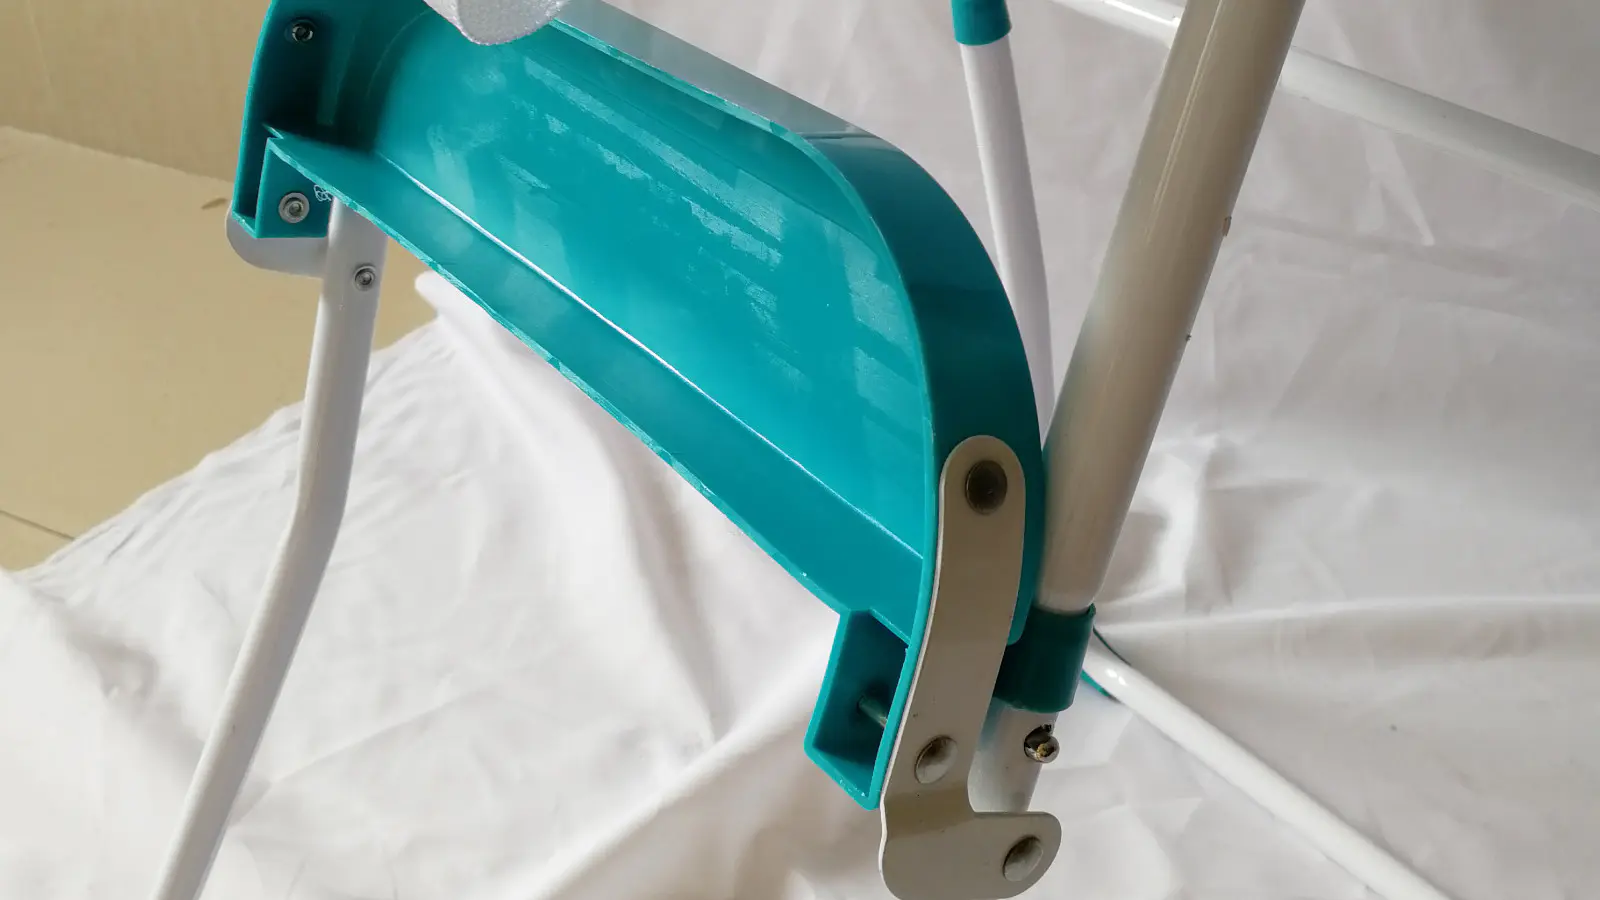 specialbaby feeding high chair customized for home